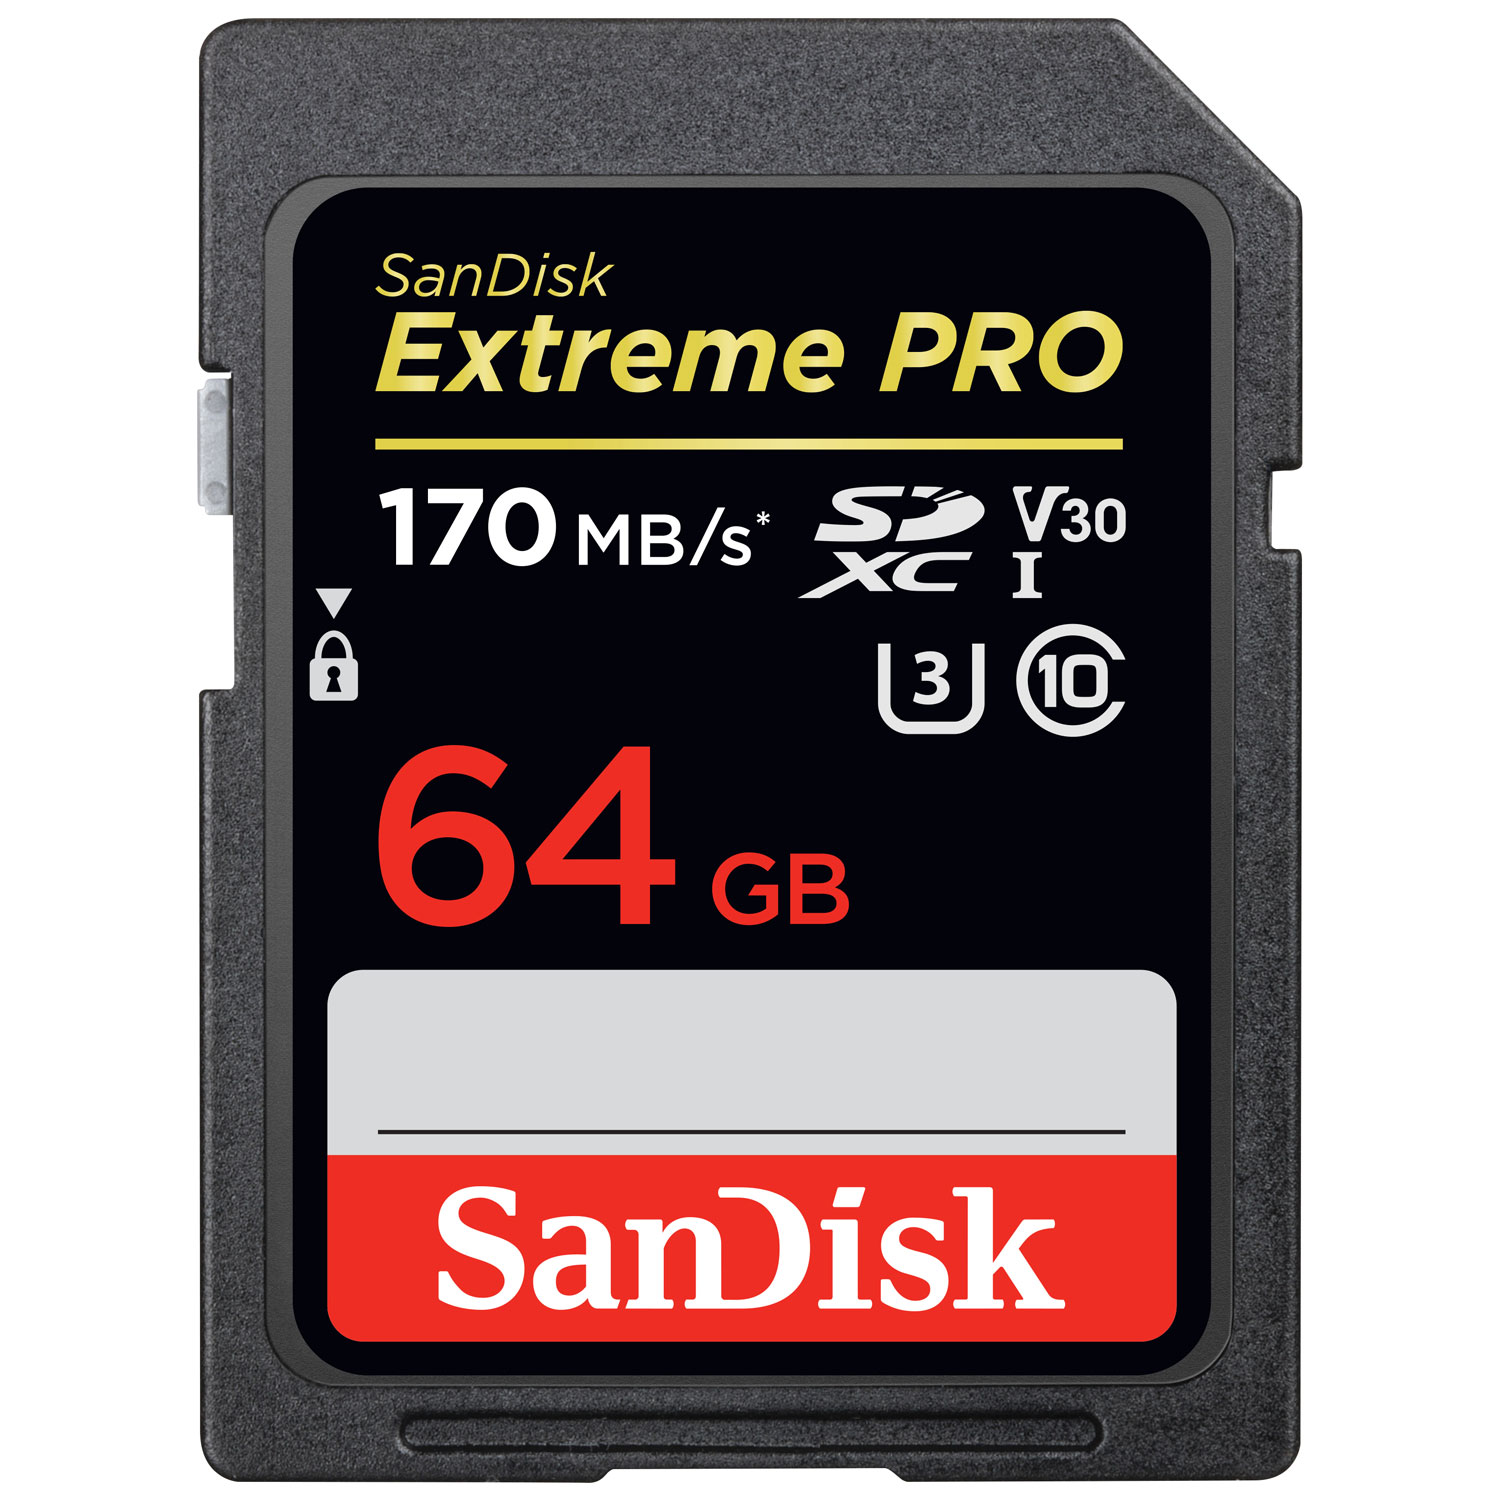 SanDisk Extreme Pro 64GB 170MB/s SDXC Memory Card